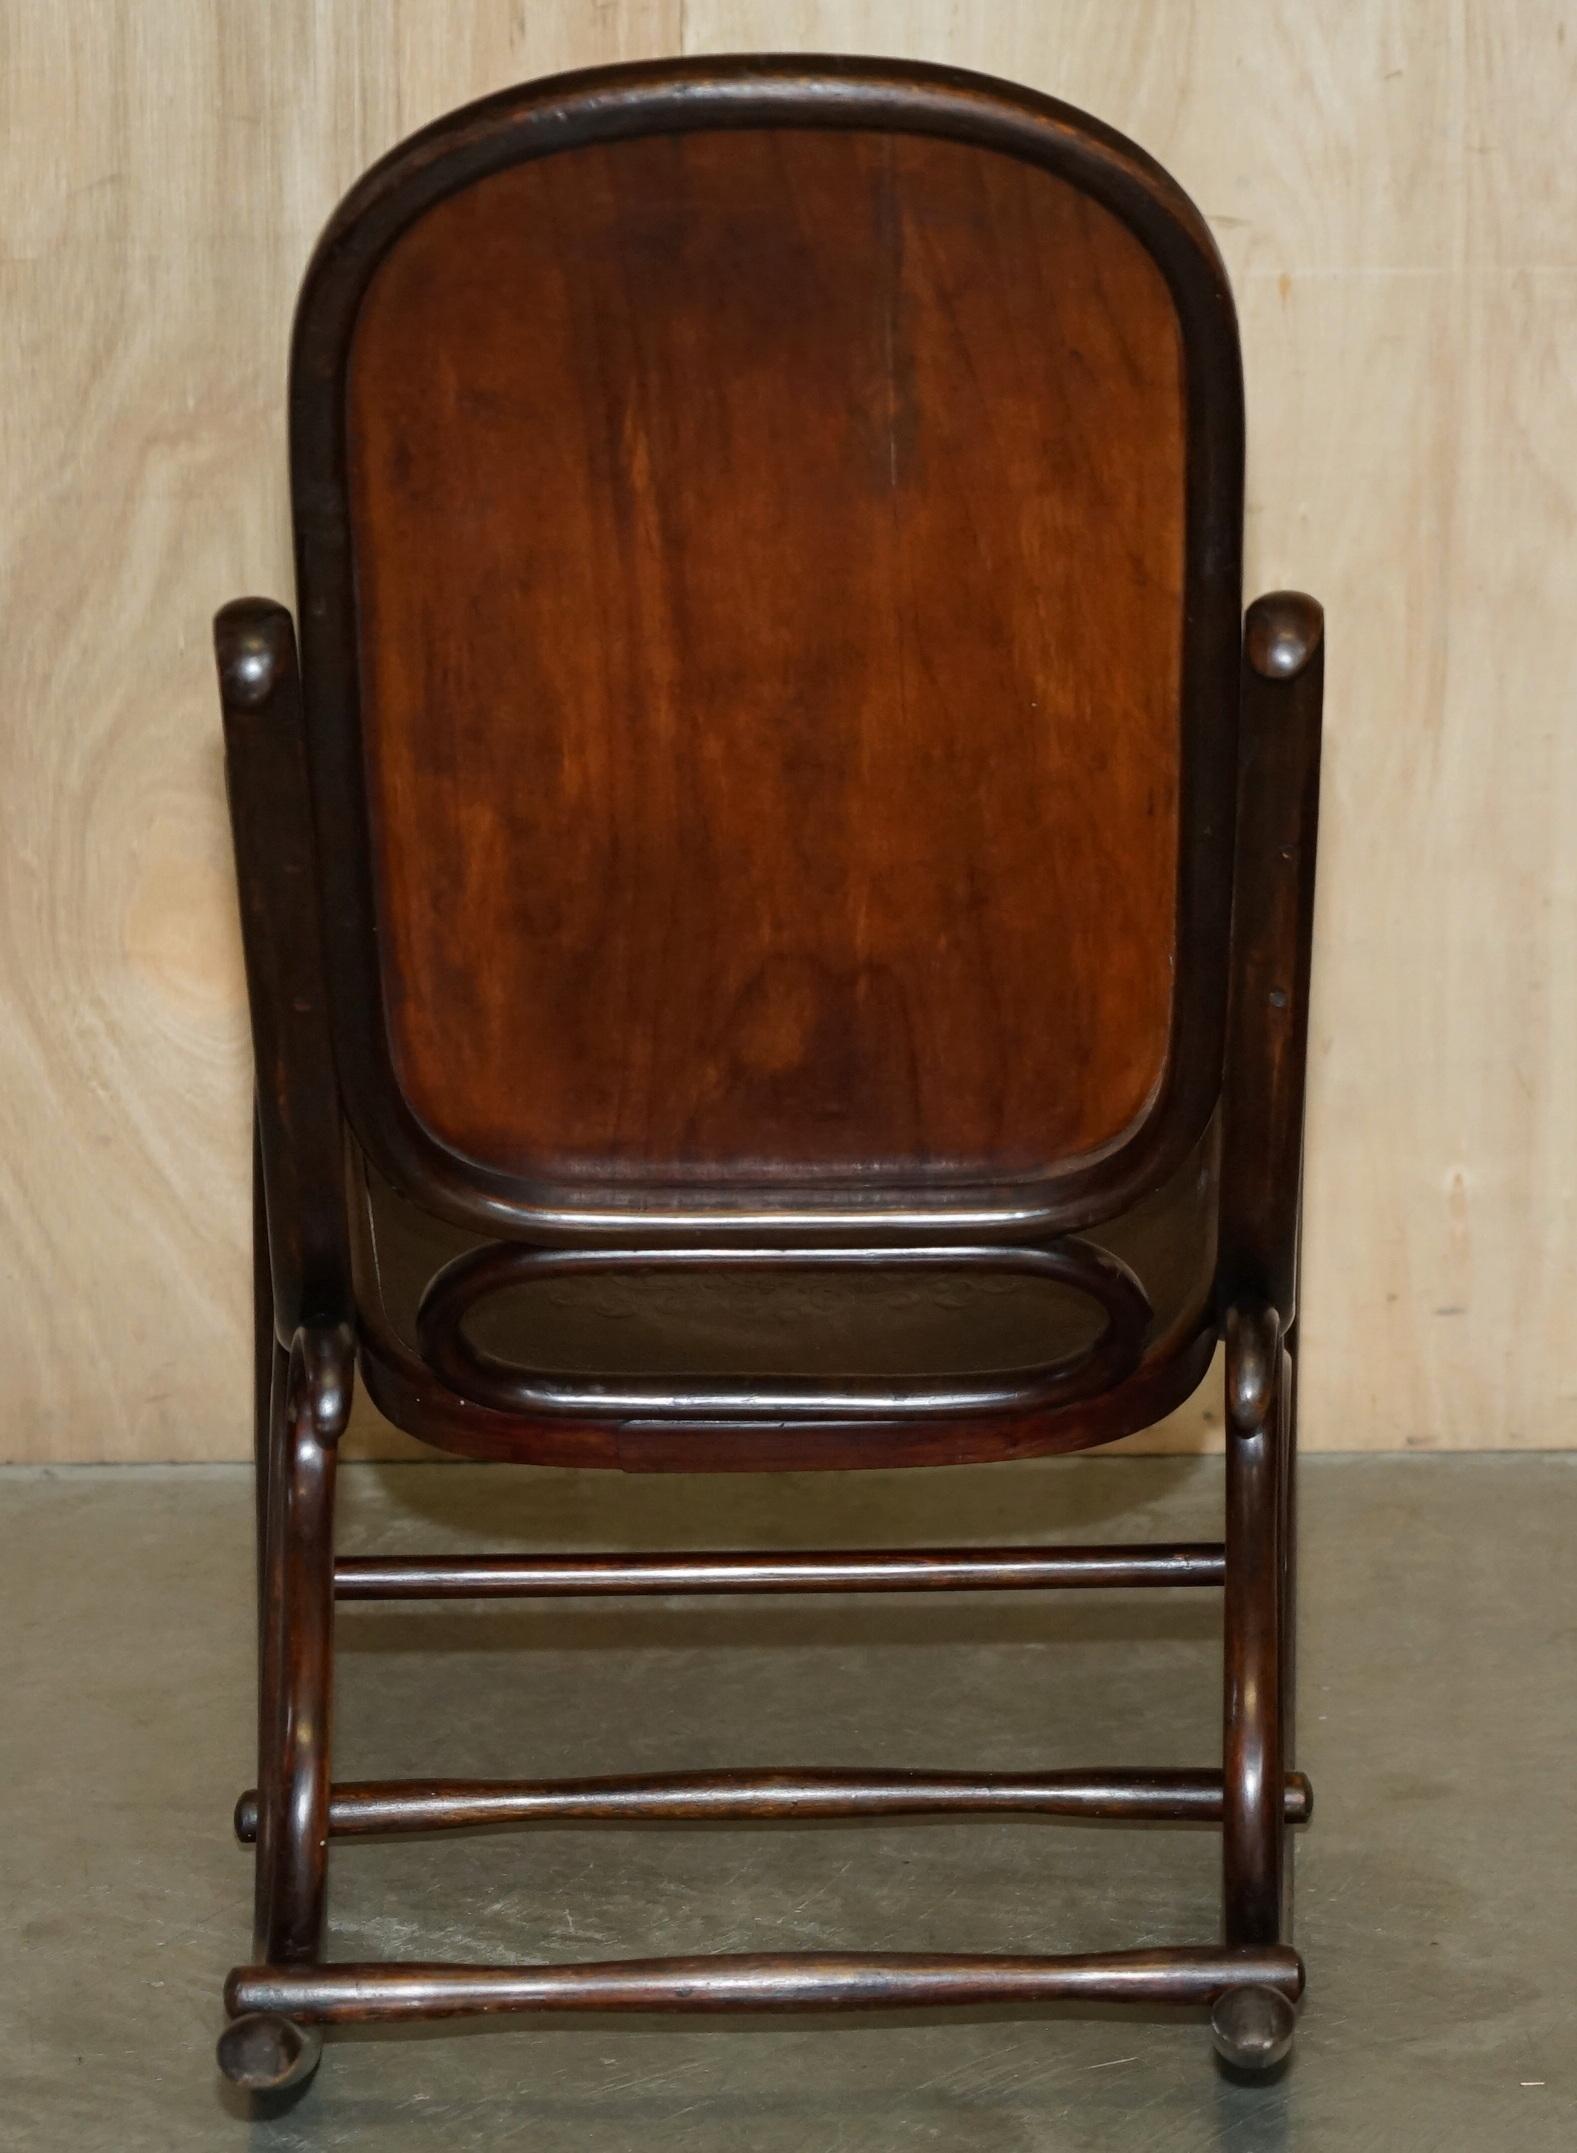 EXQUISITE ViCTORIAN THONET ROCKING CHAIR WITH CHERUB CARVED BACK & SEAT PANELS For Sale 7